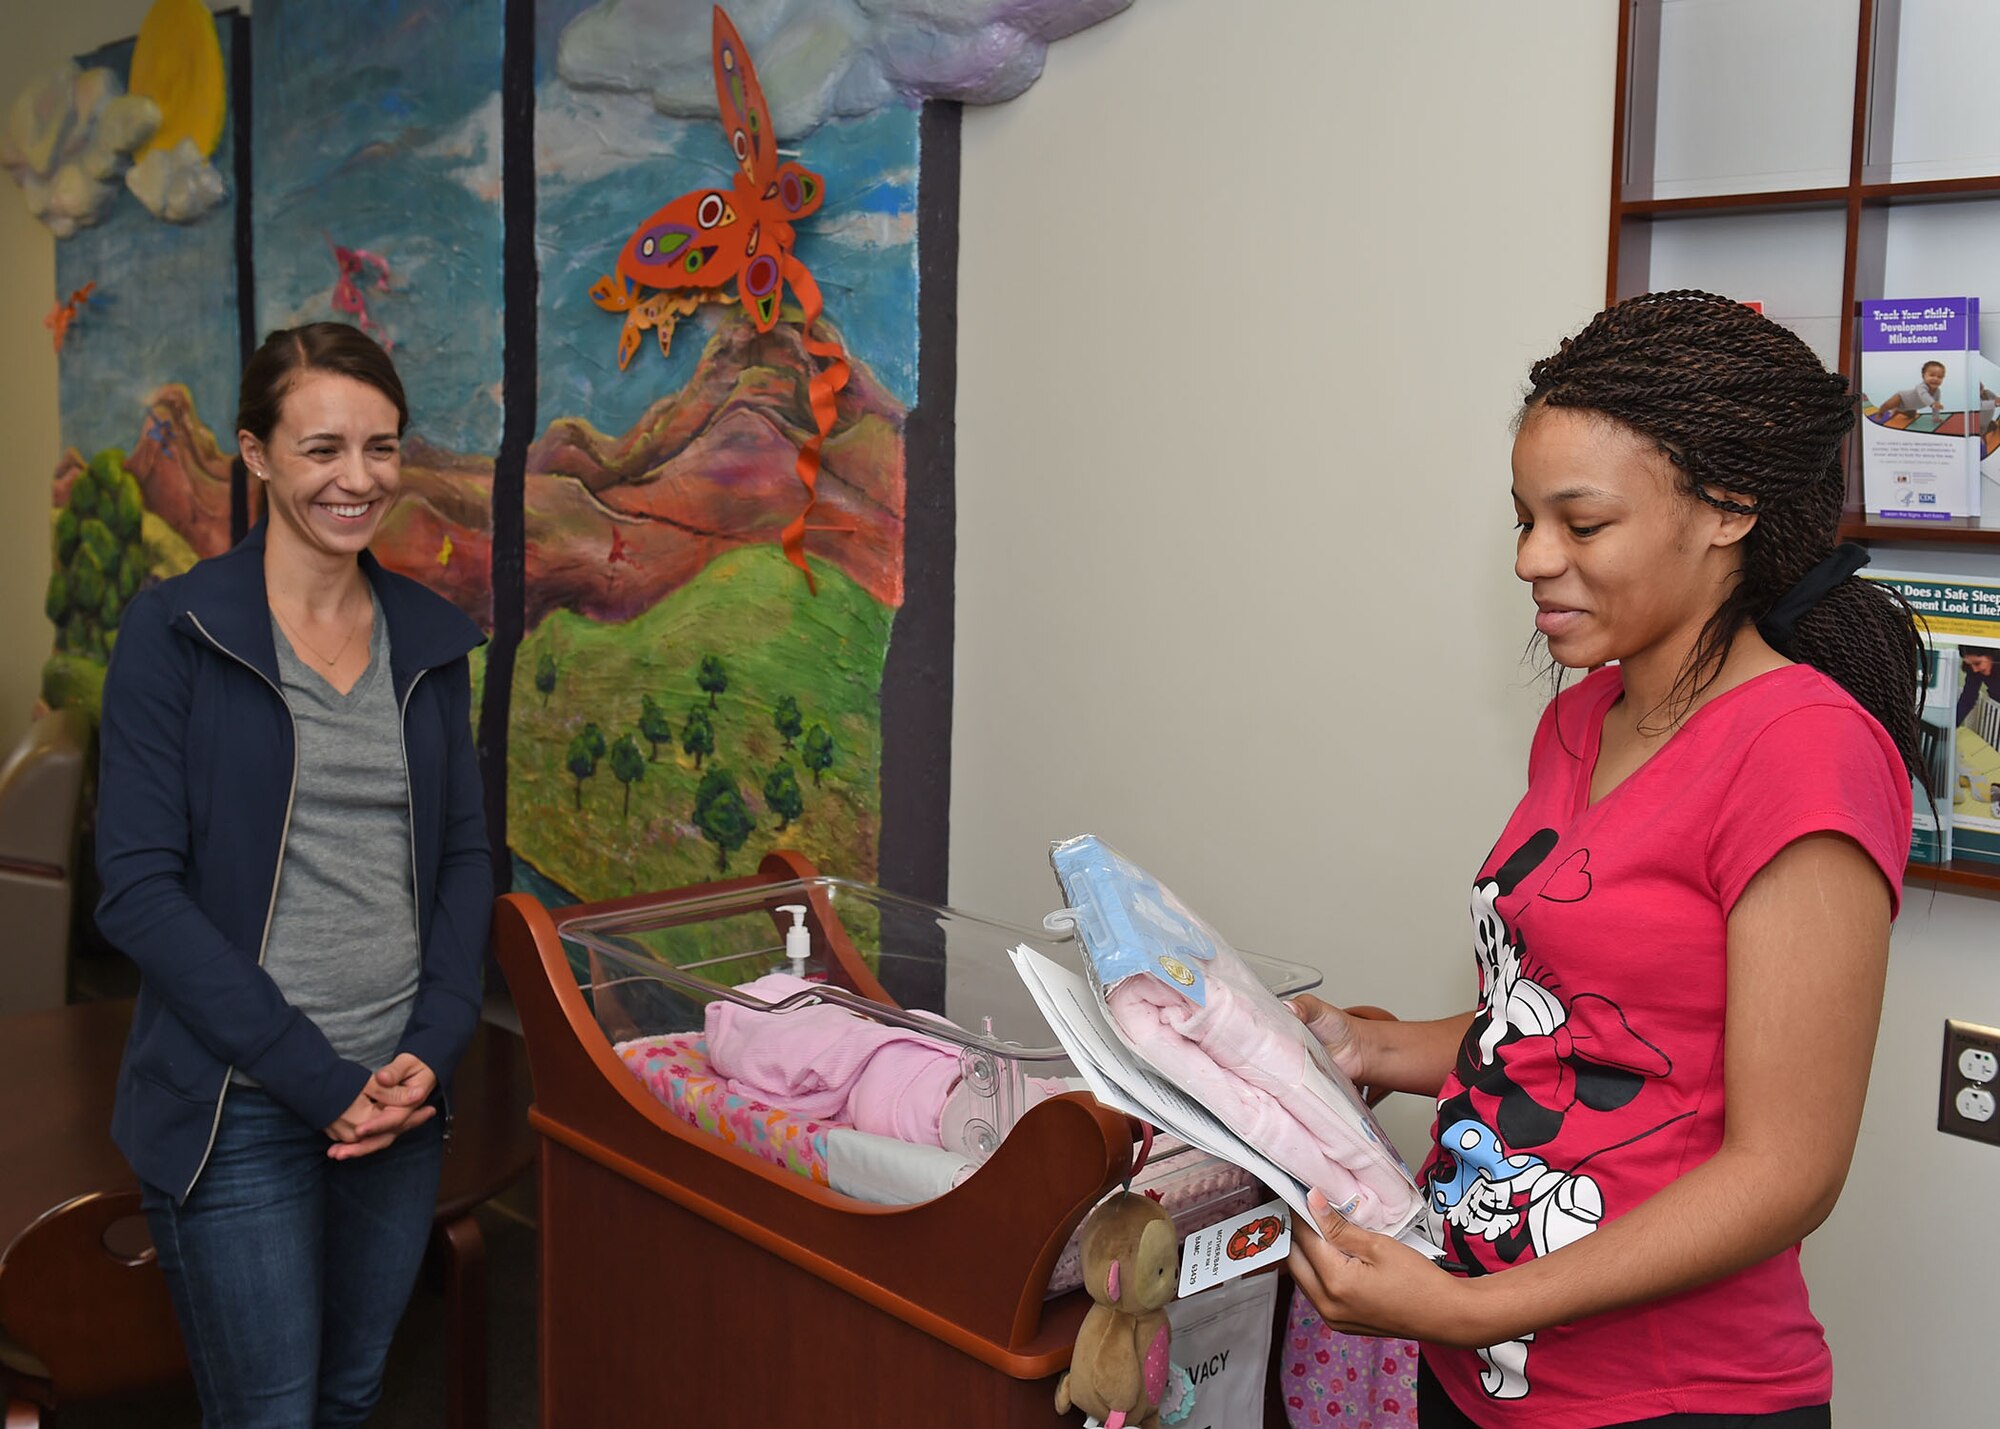 Kelly Banachowski, Wilford Hall Auxiliary service chair (left), presents Jasmine Reese (right) with the first neonatal intensive care unit Halo SleepSack March 23 at the San Antonio Military Medical Center. Reese received the gift before leaving SAMMC with her newborn daughter. Donated by the WHA, the SleepSacks are used at SAMMC to promote the safety of sleeping newborns. (U.S. Air Force photo/Tech. Sgt. Christopher Carwile)